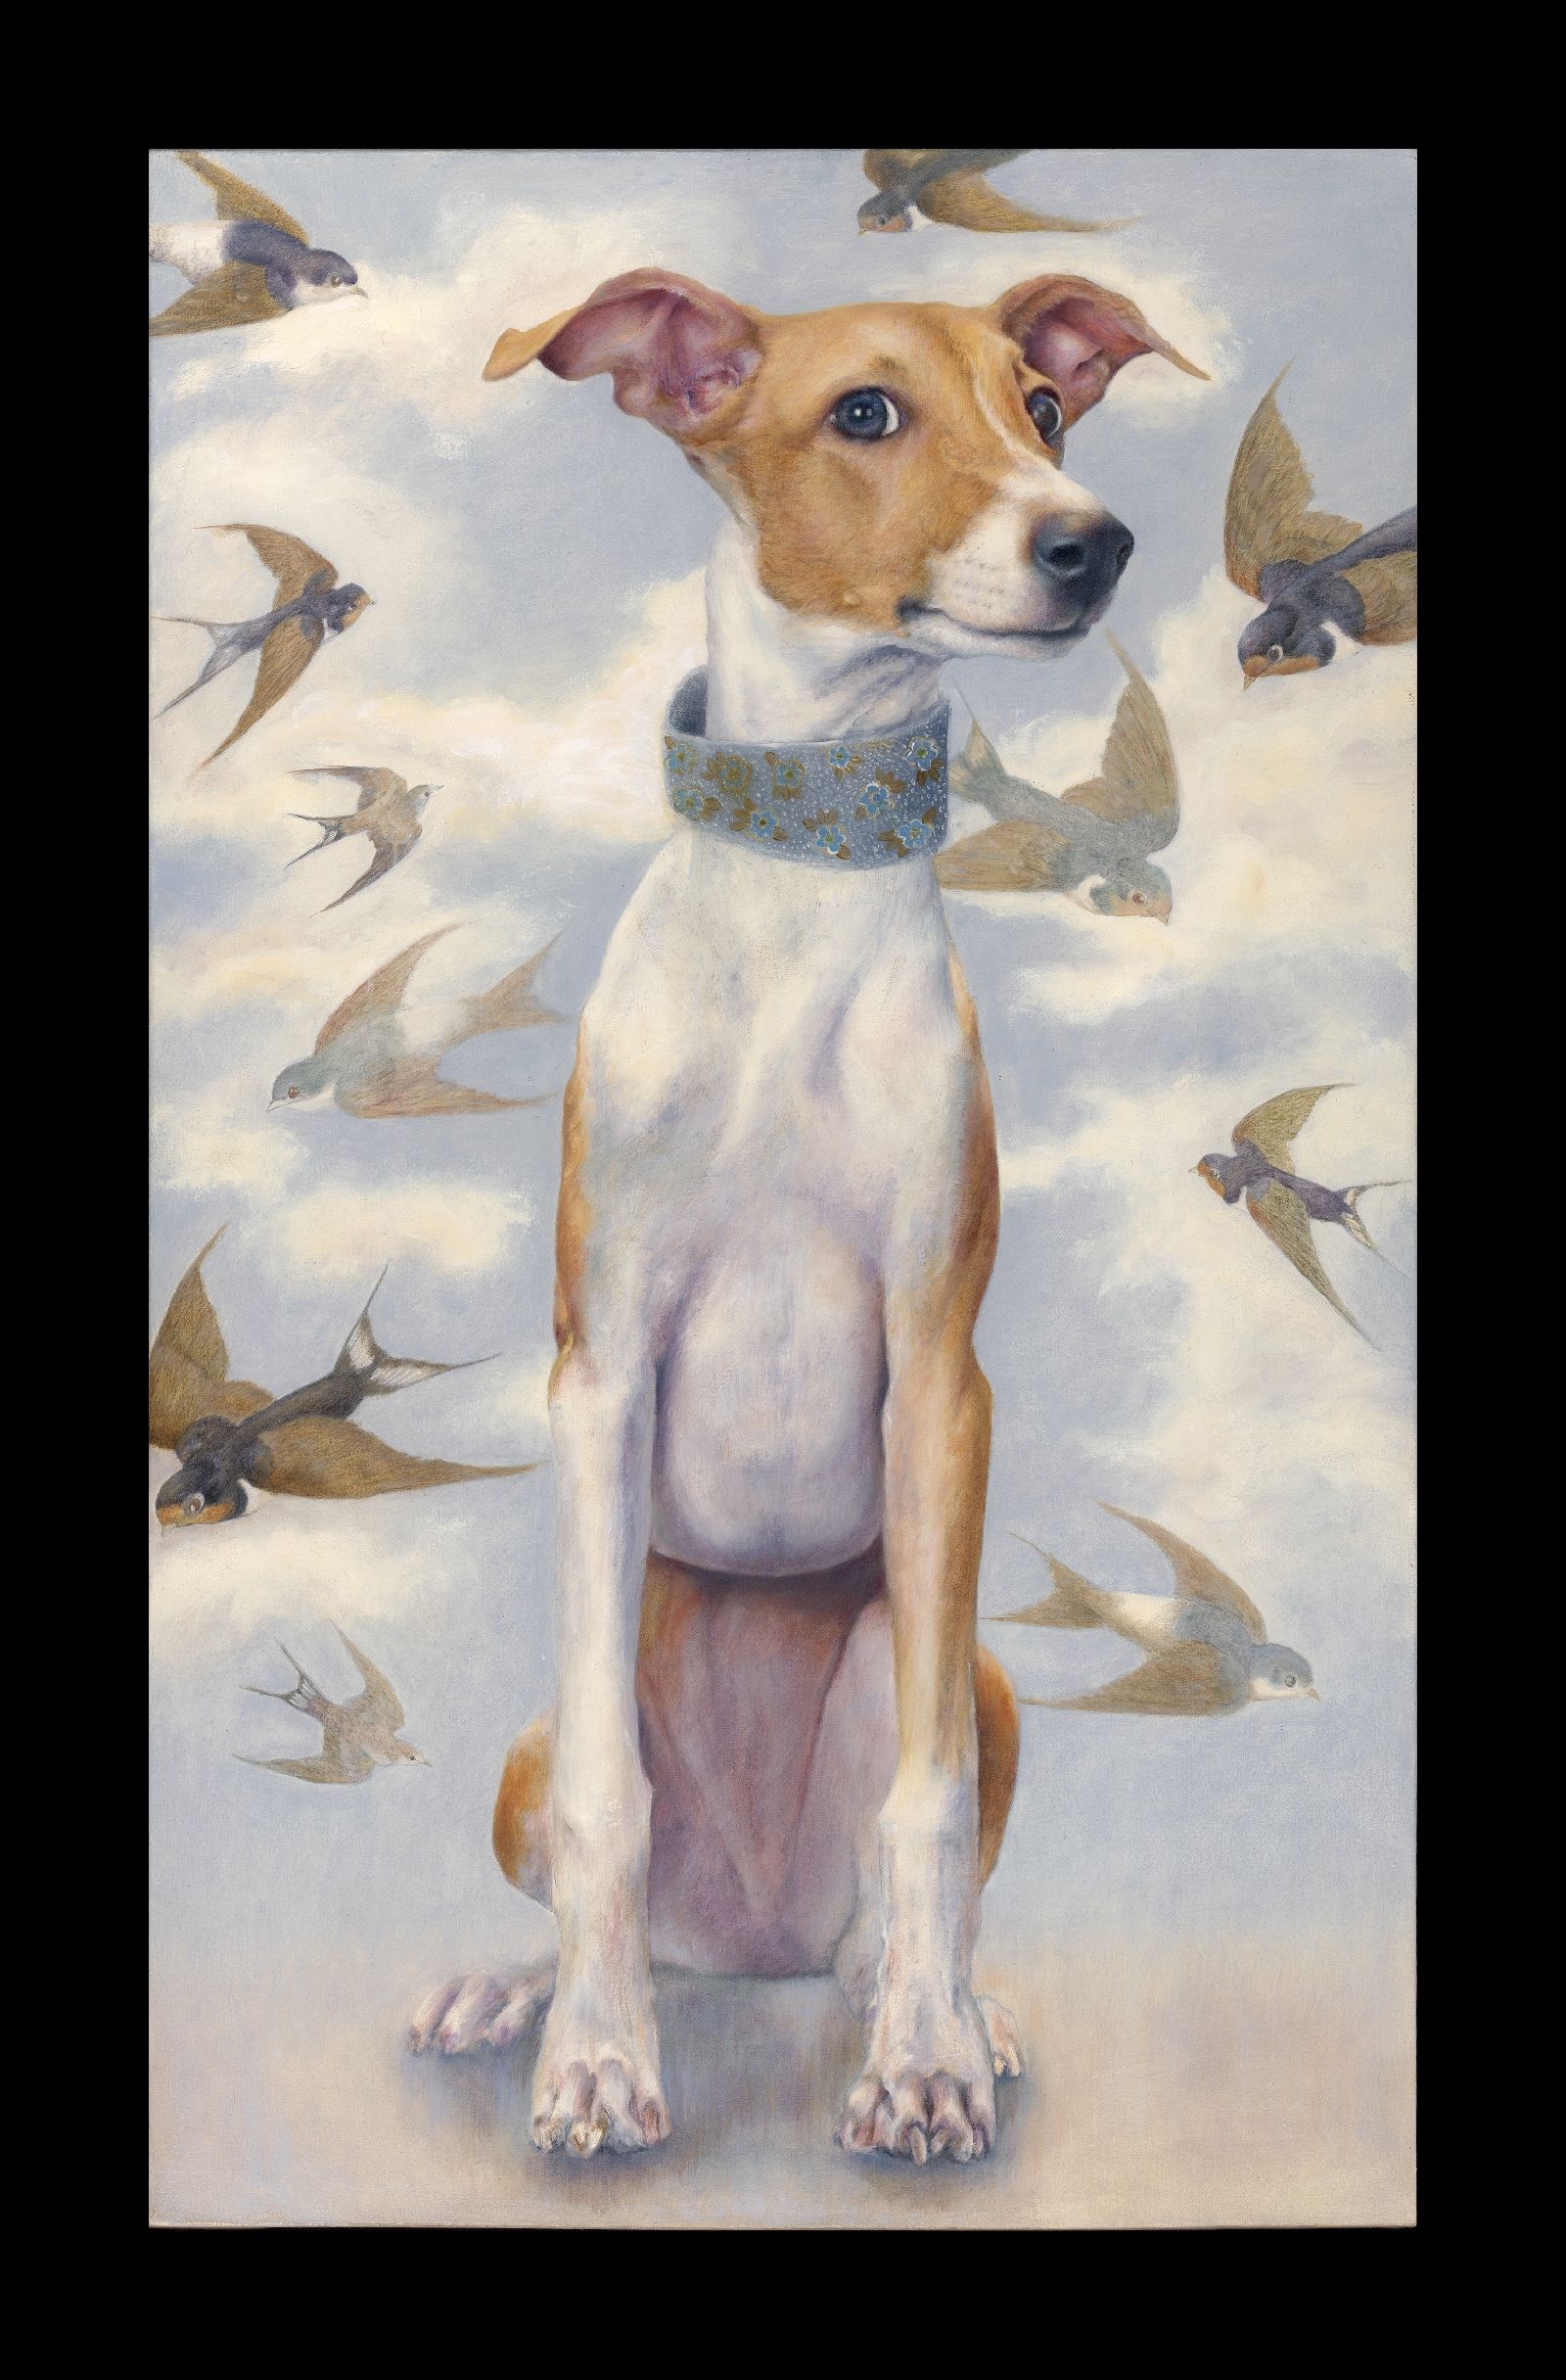 Wish I could fly by Karen  Lightfoot